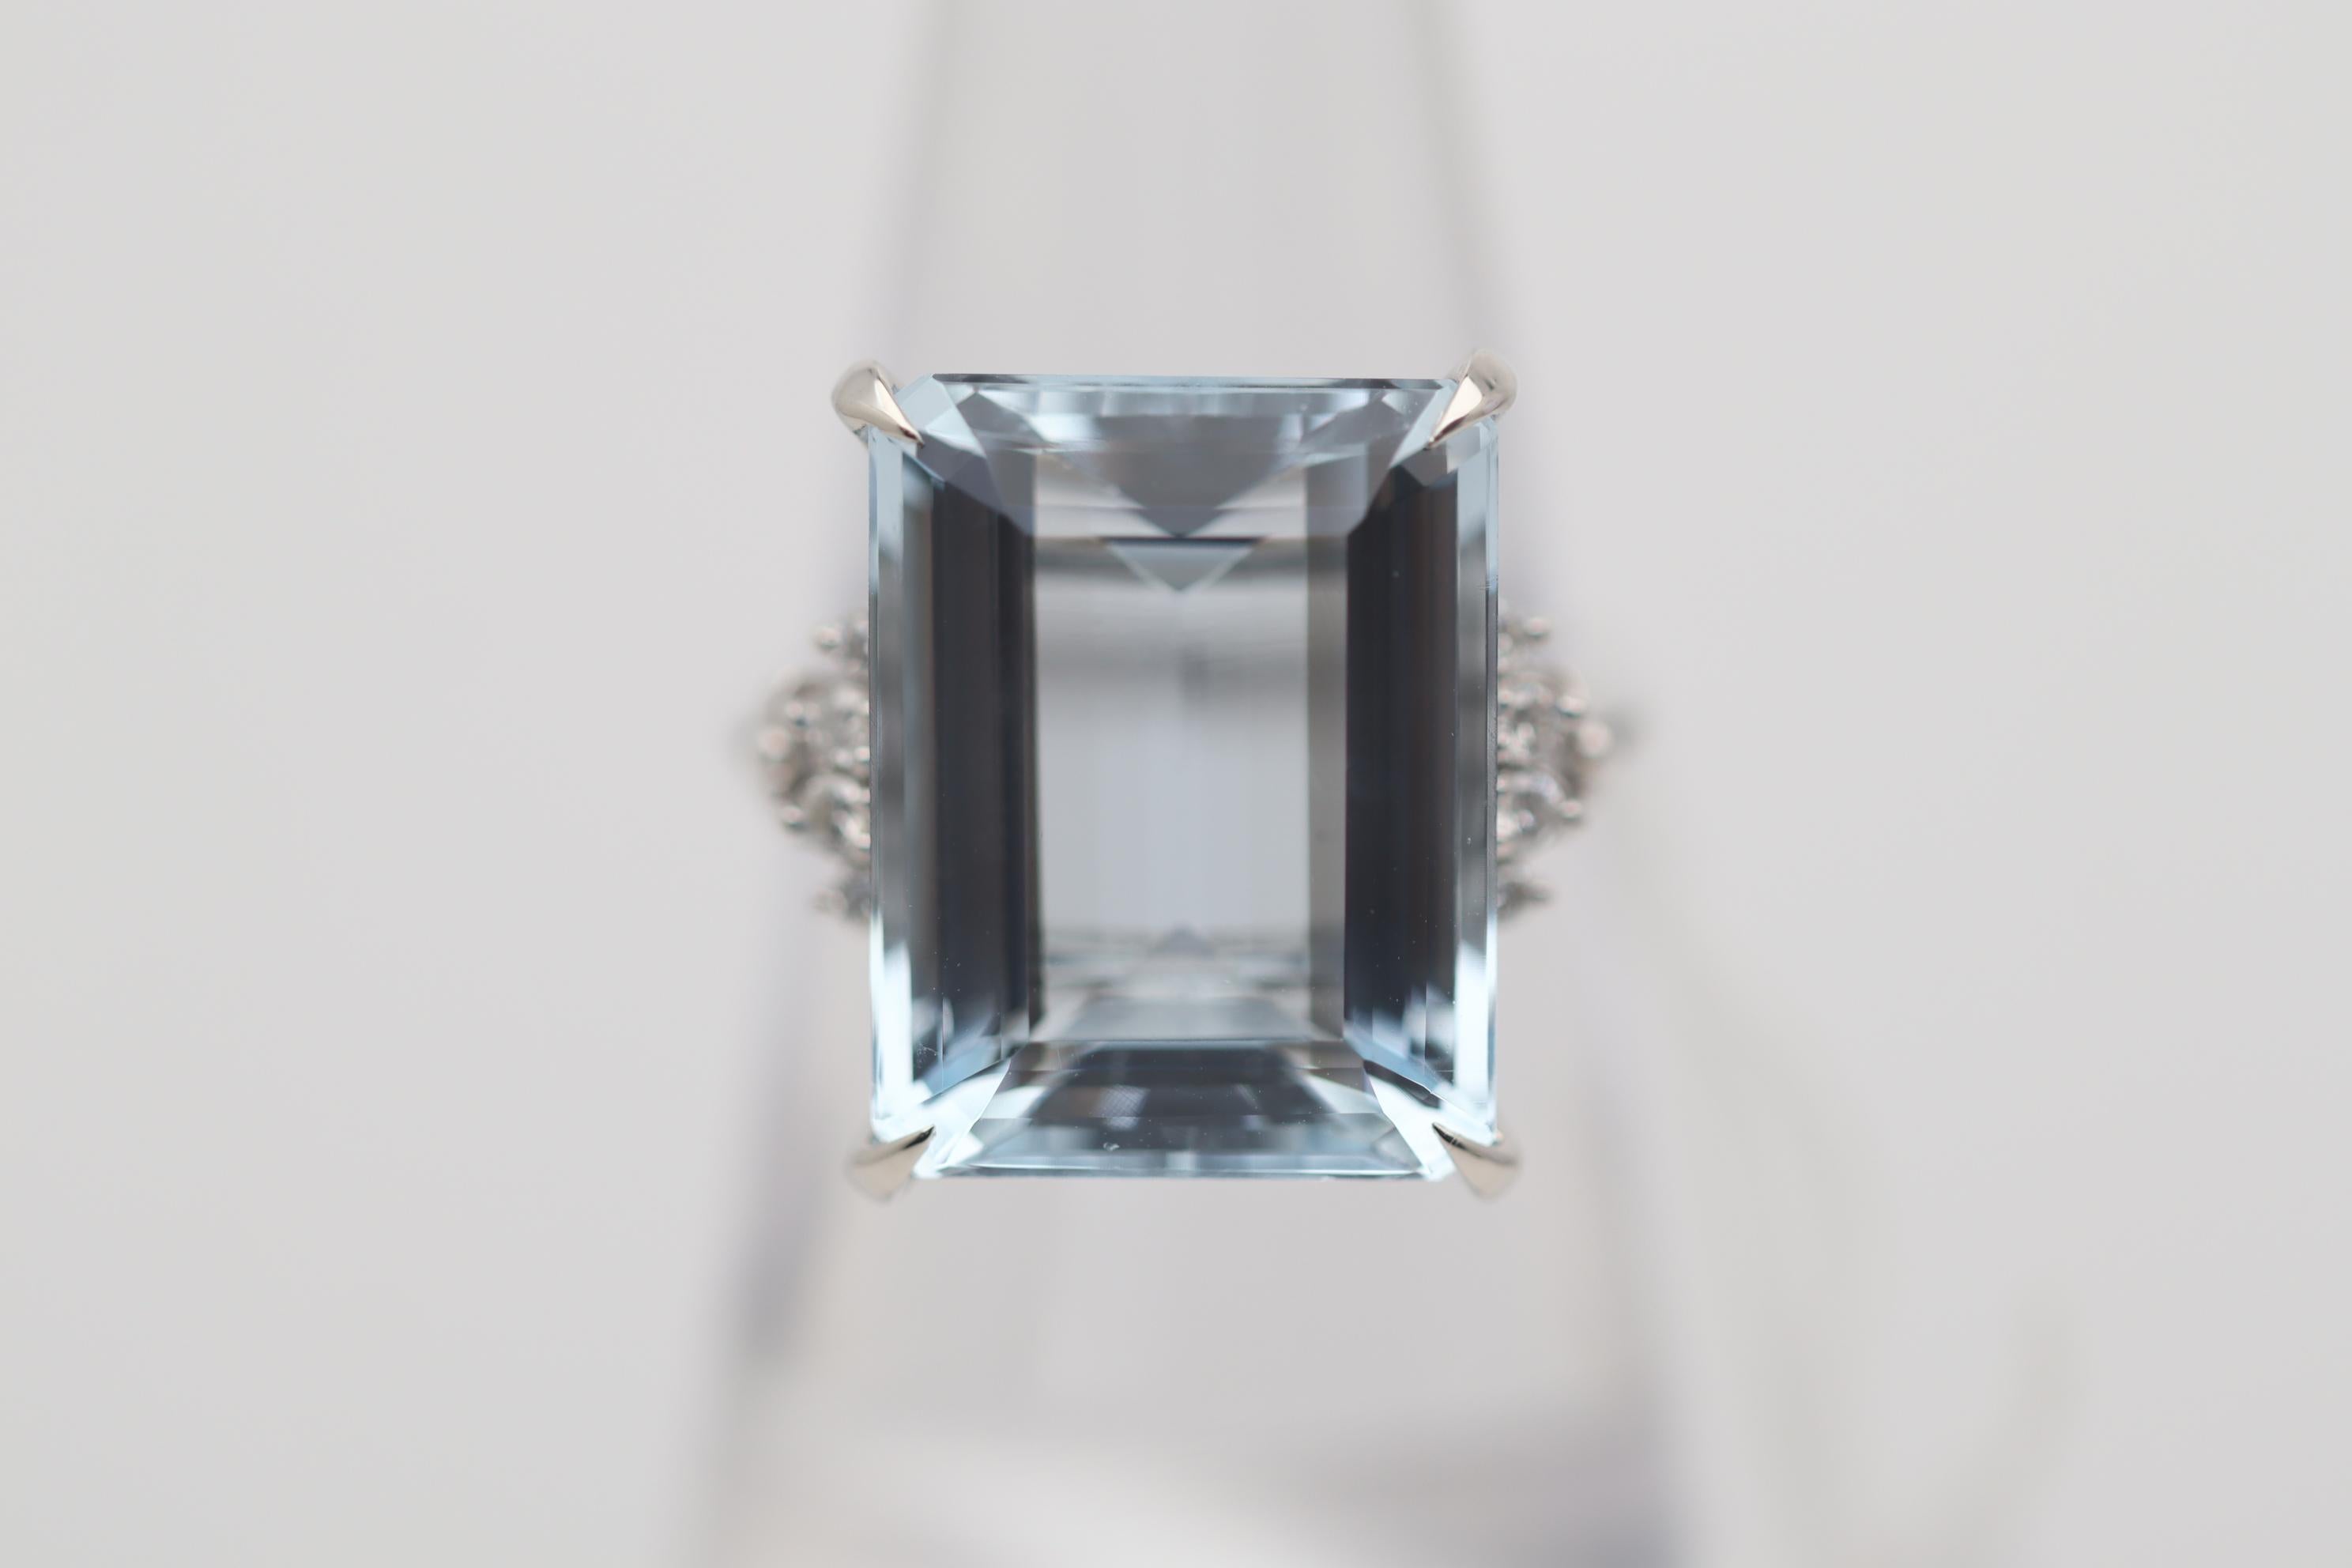 A stylish and classy ring featuring a 12.46 carat aquamarine with a lovely sea-blue color. It is complemented by 0.11 carats of round brilliant-cut diamonds set on its sides adding additional brilliance and sparkle to the ring. Hand-fabricated in